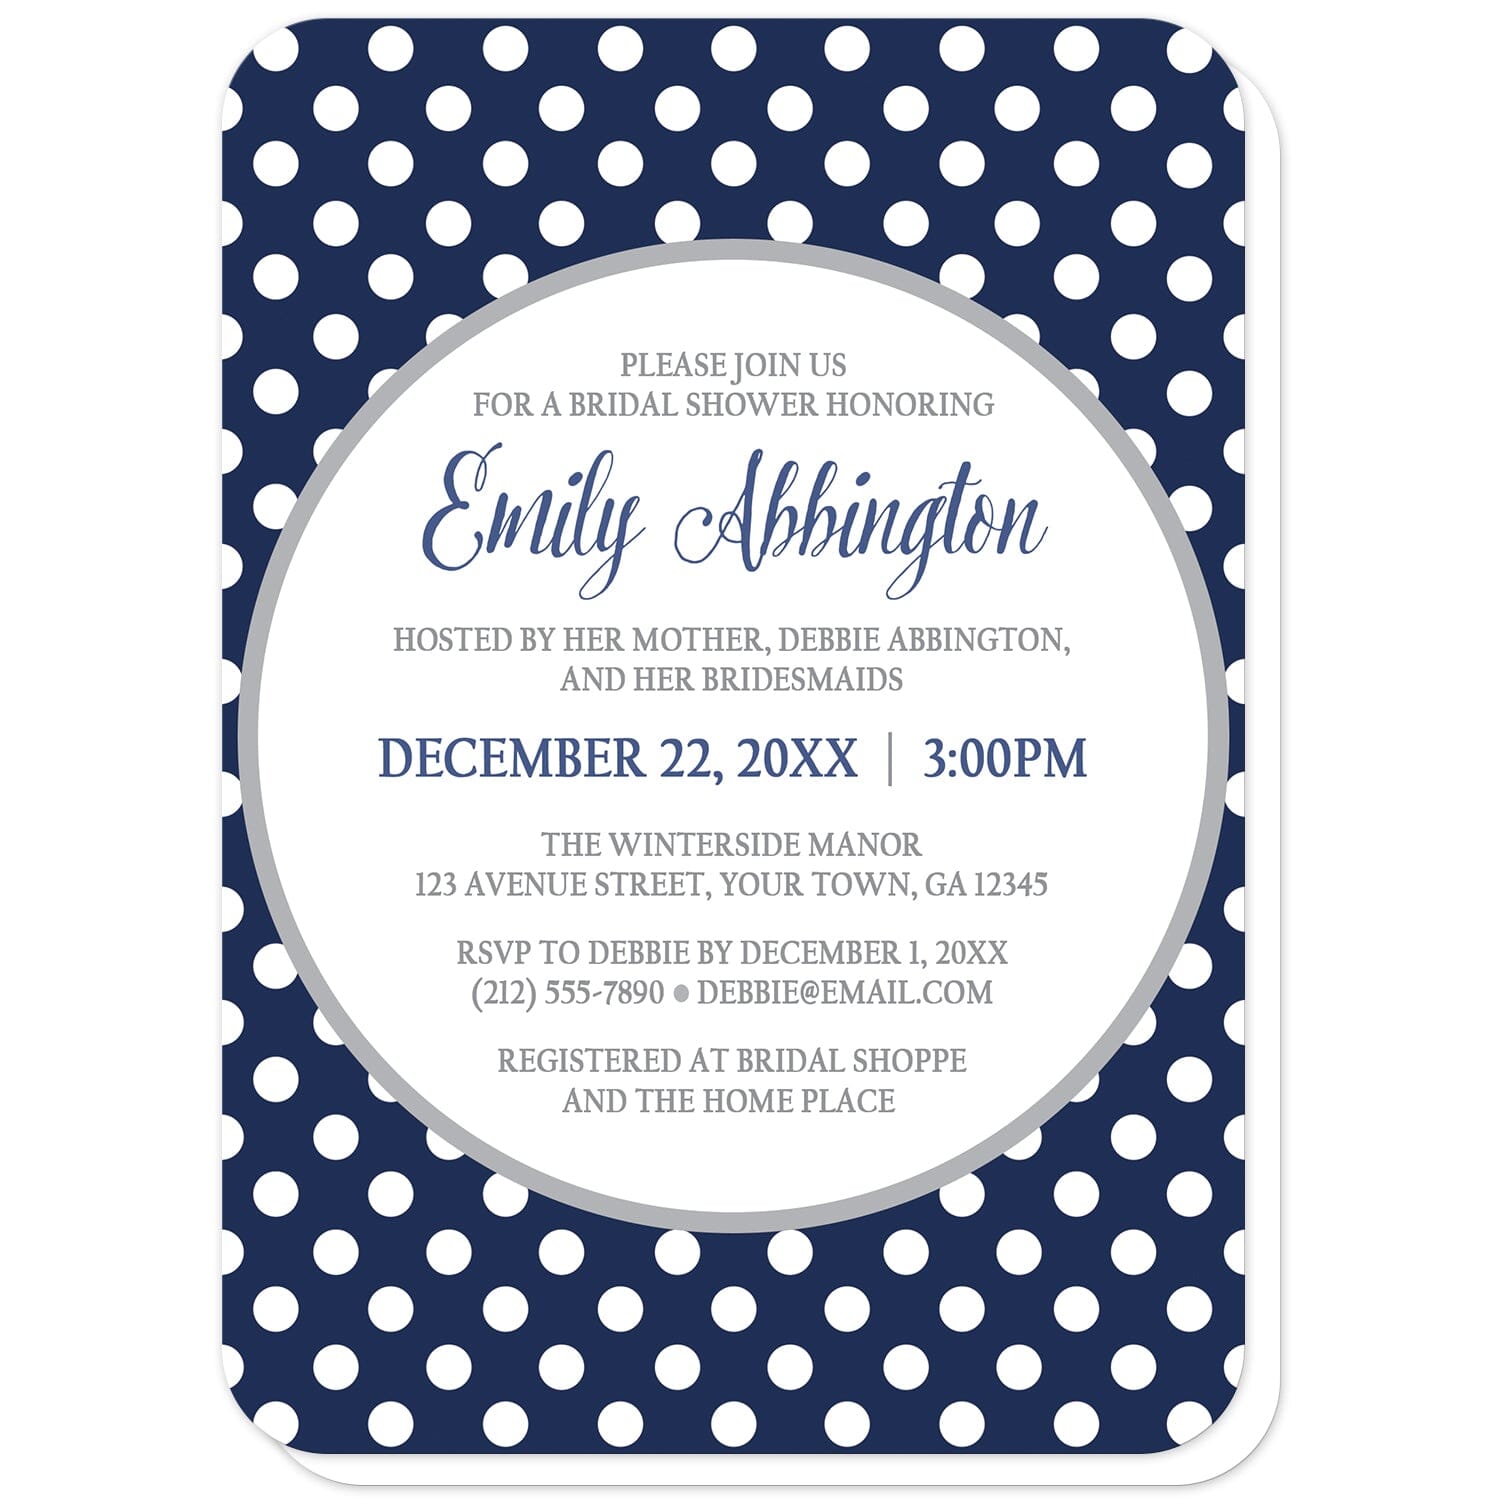 Gray Navy Blue Polka Dot Bridal Shower Invitations (with rounded corners) at Artistically Invited. Gray navy blue polka dot bridal shower invitations with your personalized celebration details custom printed in navy blue and gray inside a white circle outlined in light gray, over a navy blue polka dot pattern with white polka dots over blue. 